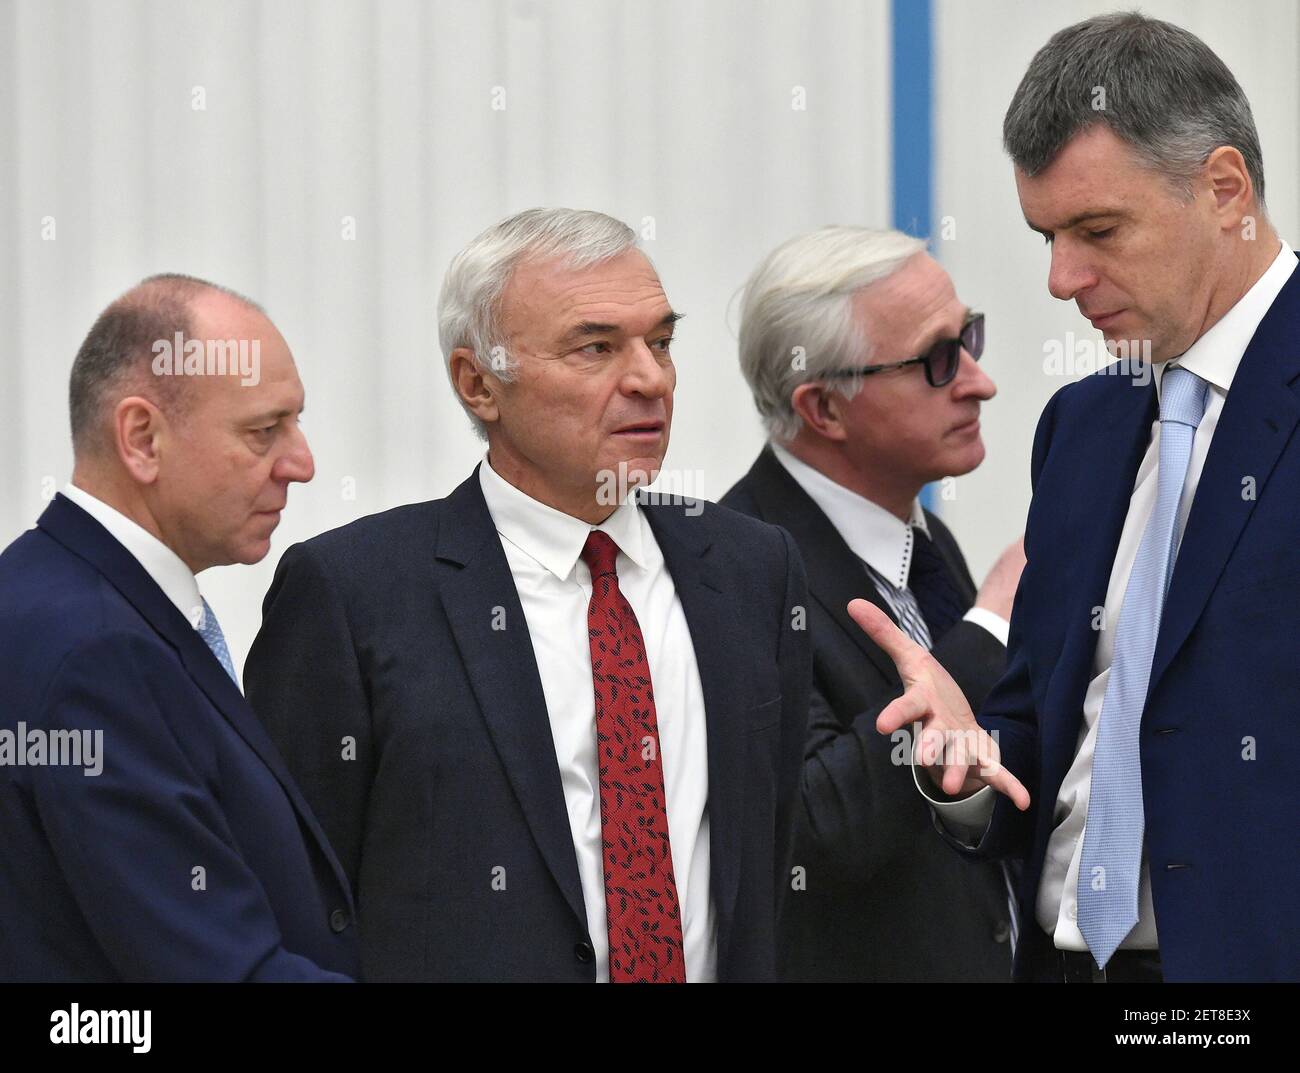 Meeting of Russian President Vladimir Putin with representatives of Russian business community in the Kremlin. Left to right: Dmitry Pumpyansky, Chairman of the Board of Directors of TMK Holding; Viktor Rashnikov, Chairman of the Board of Directors of Magnitogorsk Iron and Steel Works (MMK); Alexander Shokhin, Chairman of the Russian Union of Industrialists and Entrepreneurs (RSPP); and businessman Mikhail Prokhorov before the meeting. December 26, 2018. Russia, Moscow. Photo credit: Dmitry Dukhanin/Kommersant/Sipa USA  Stock Photo